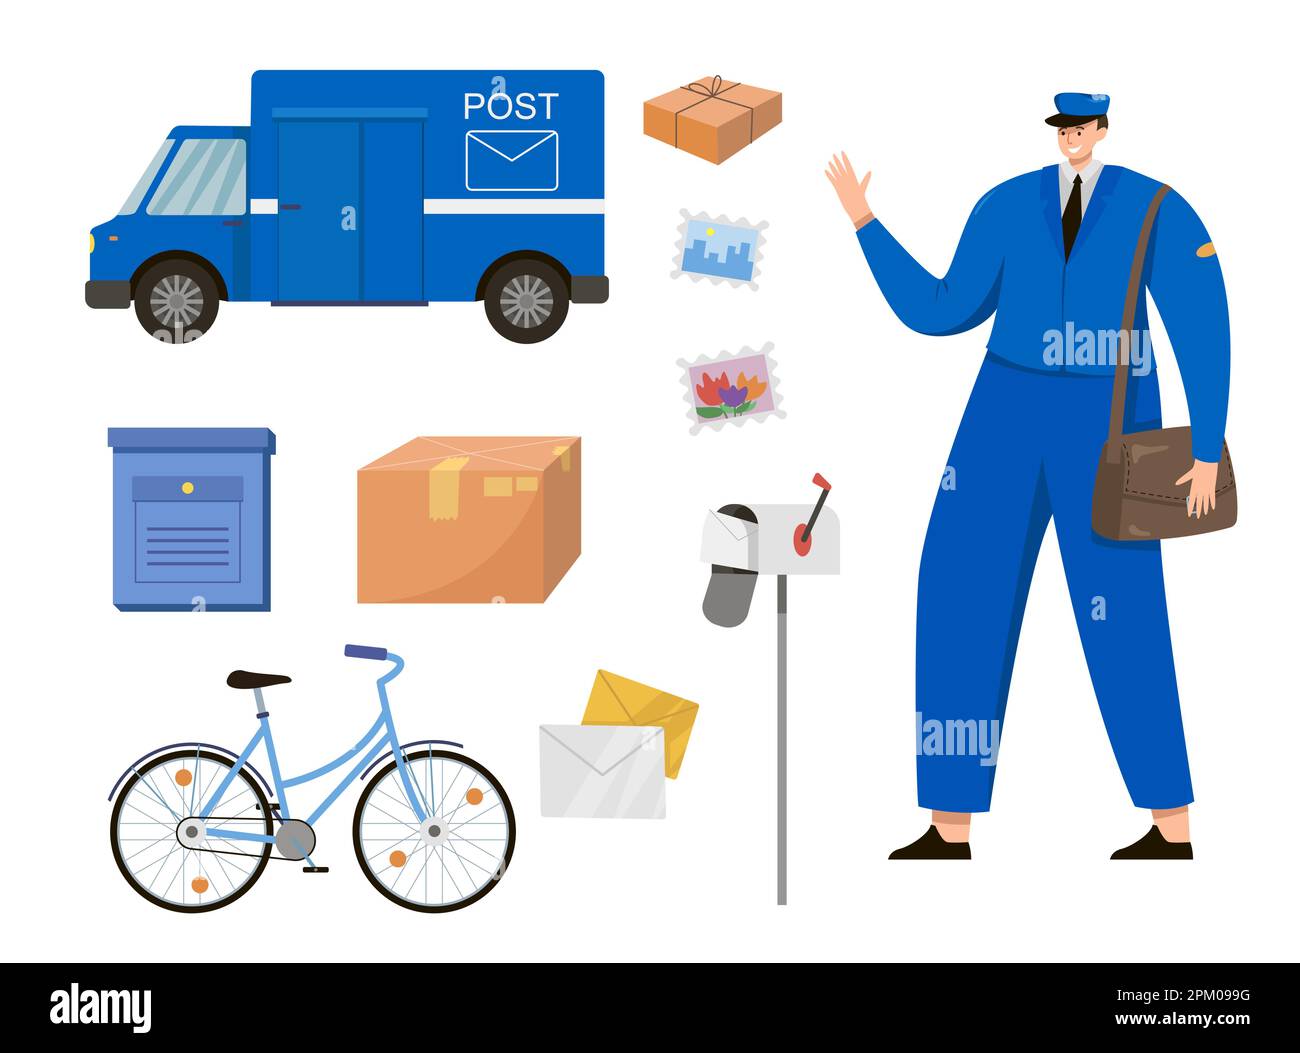 Postman character and objects of delivery service set Stock Vector